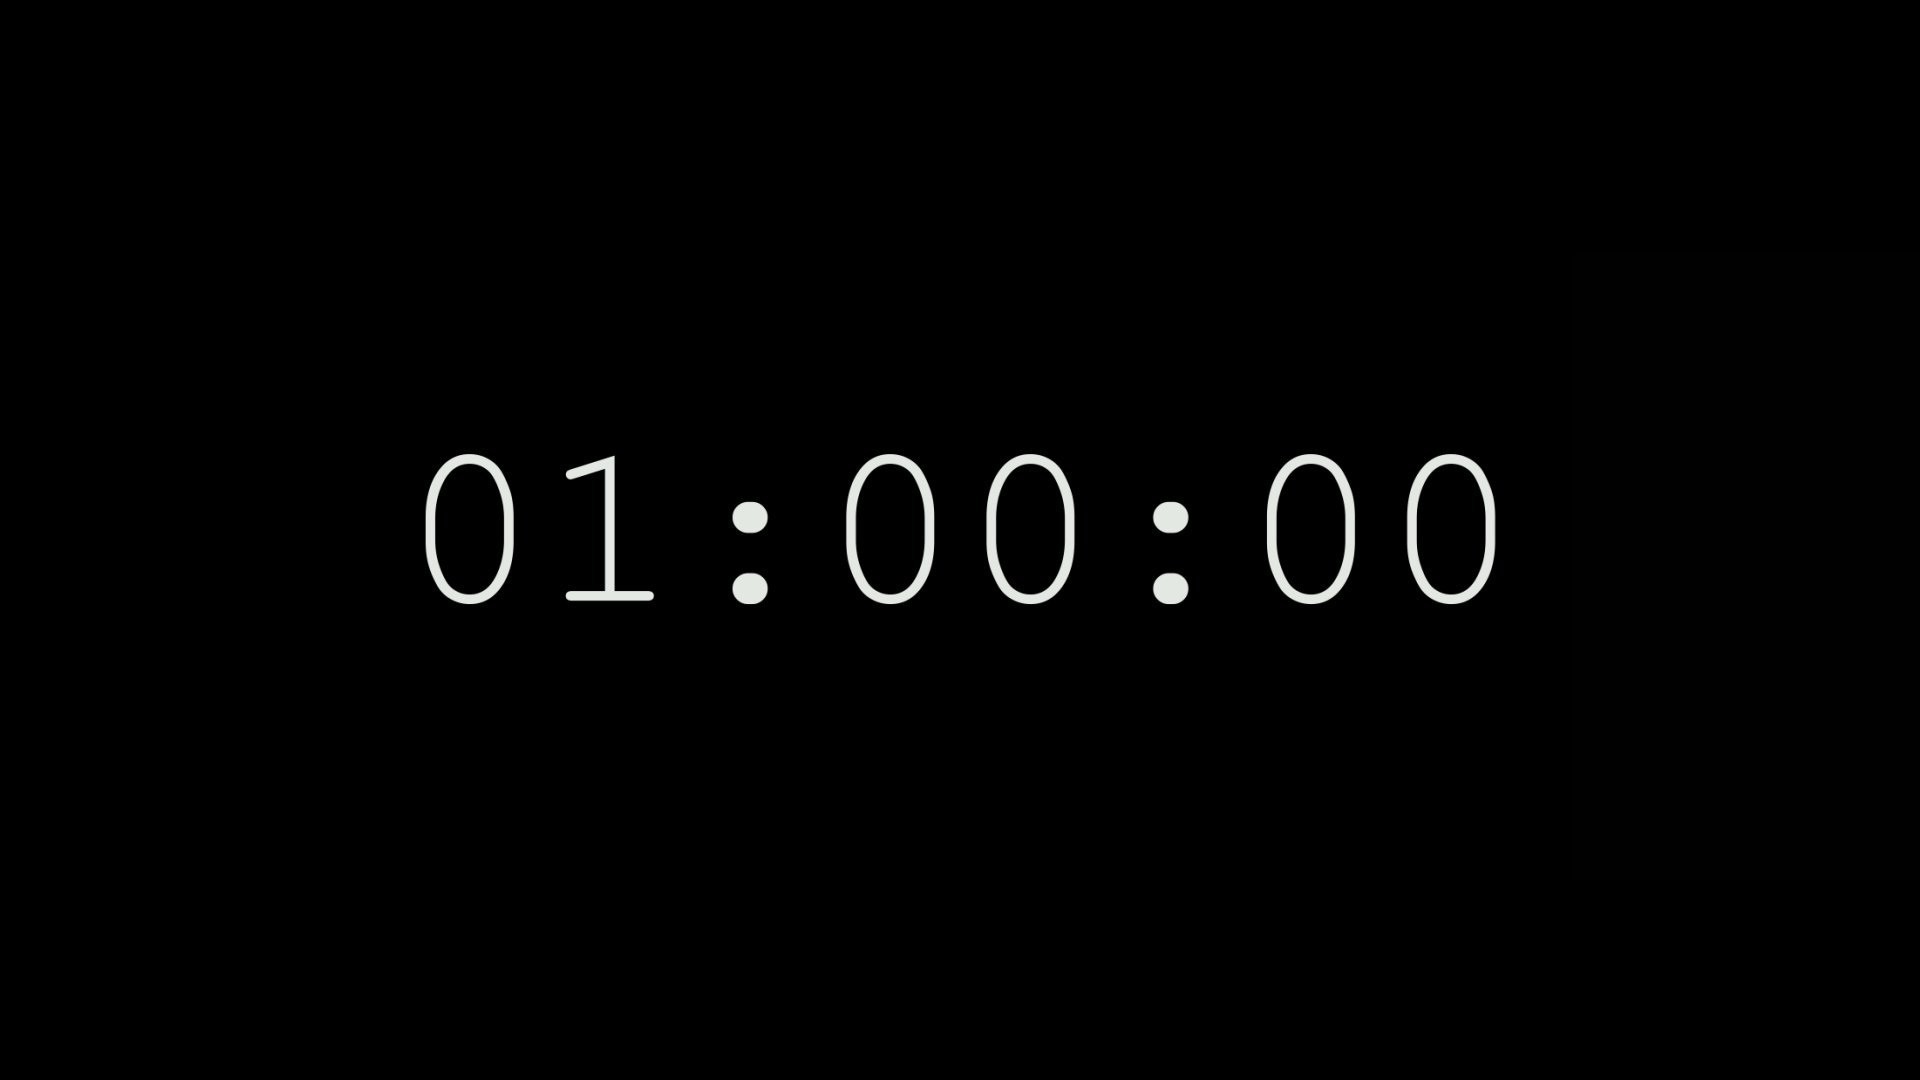 1920x1080 One Hour Countdown Clock Timer / Compte Ã  rebours d'une heure - YouTube